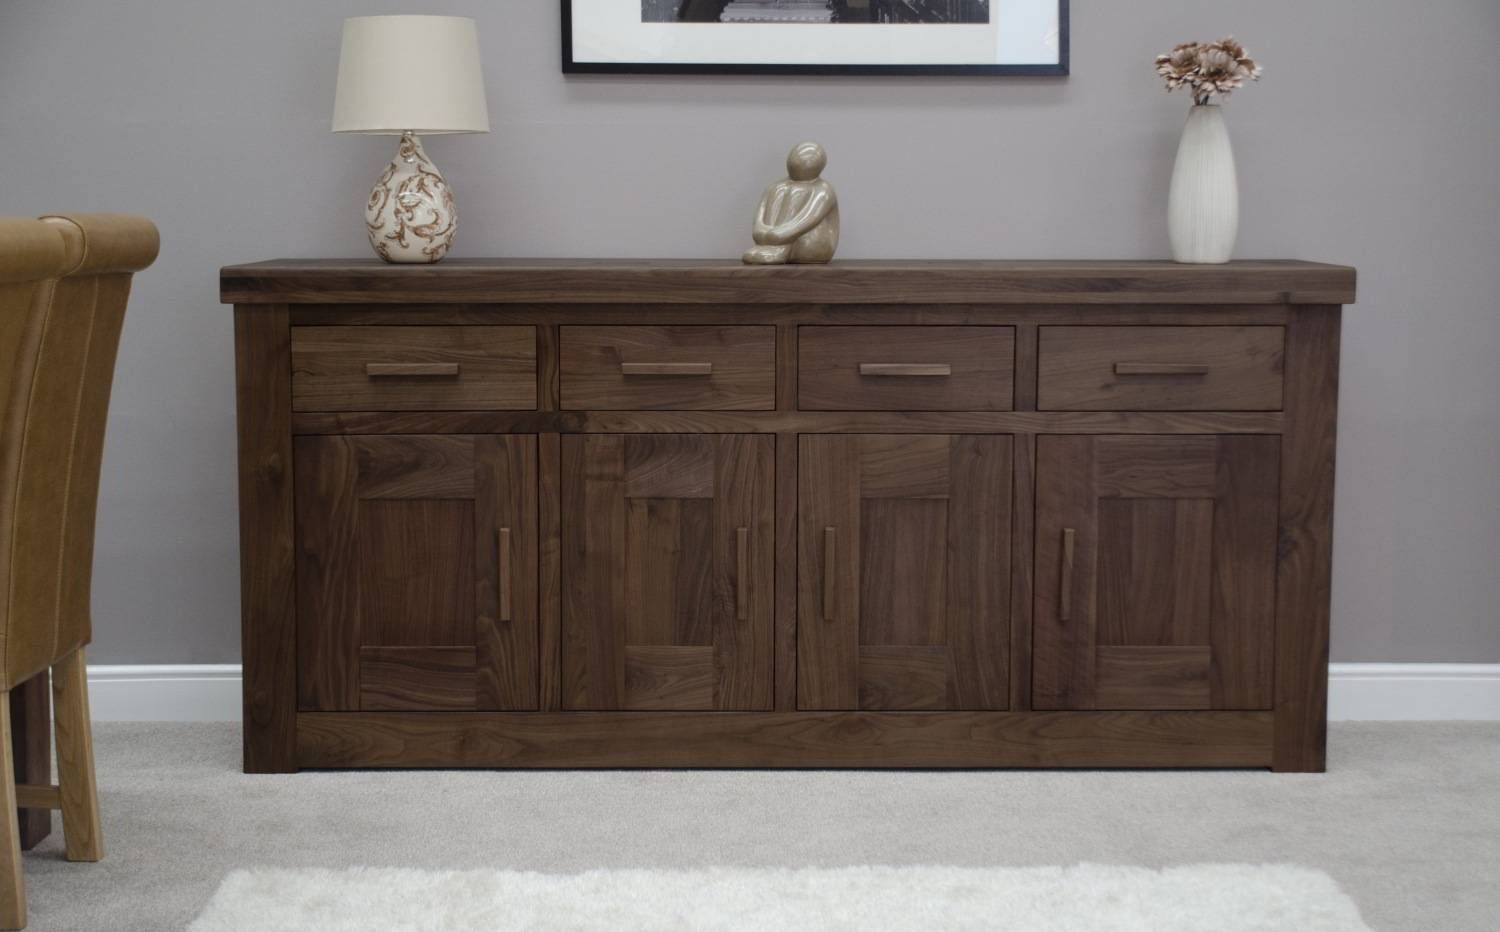 Dining Room : Dining Room Sideboard Light Wood Ideas Courtesy In Light Wood Sideboards (View 20 of 30)